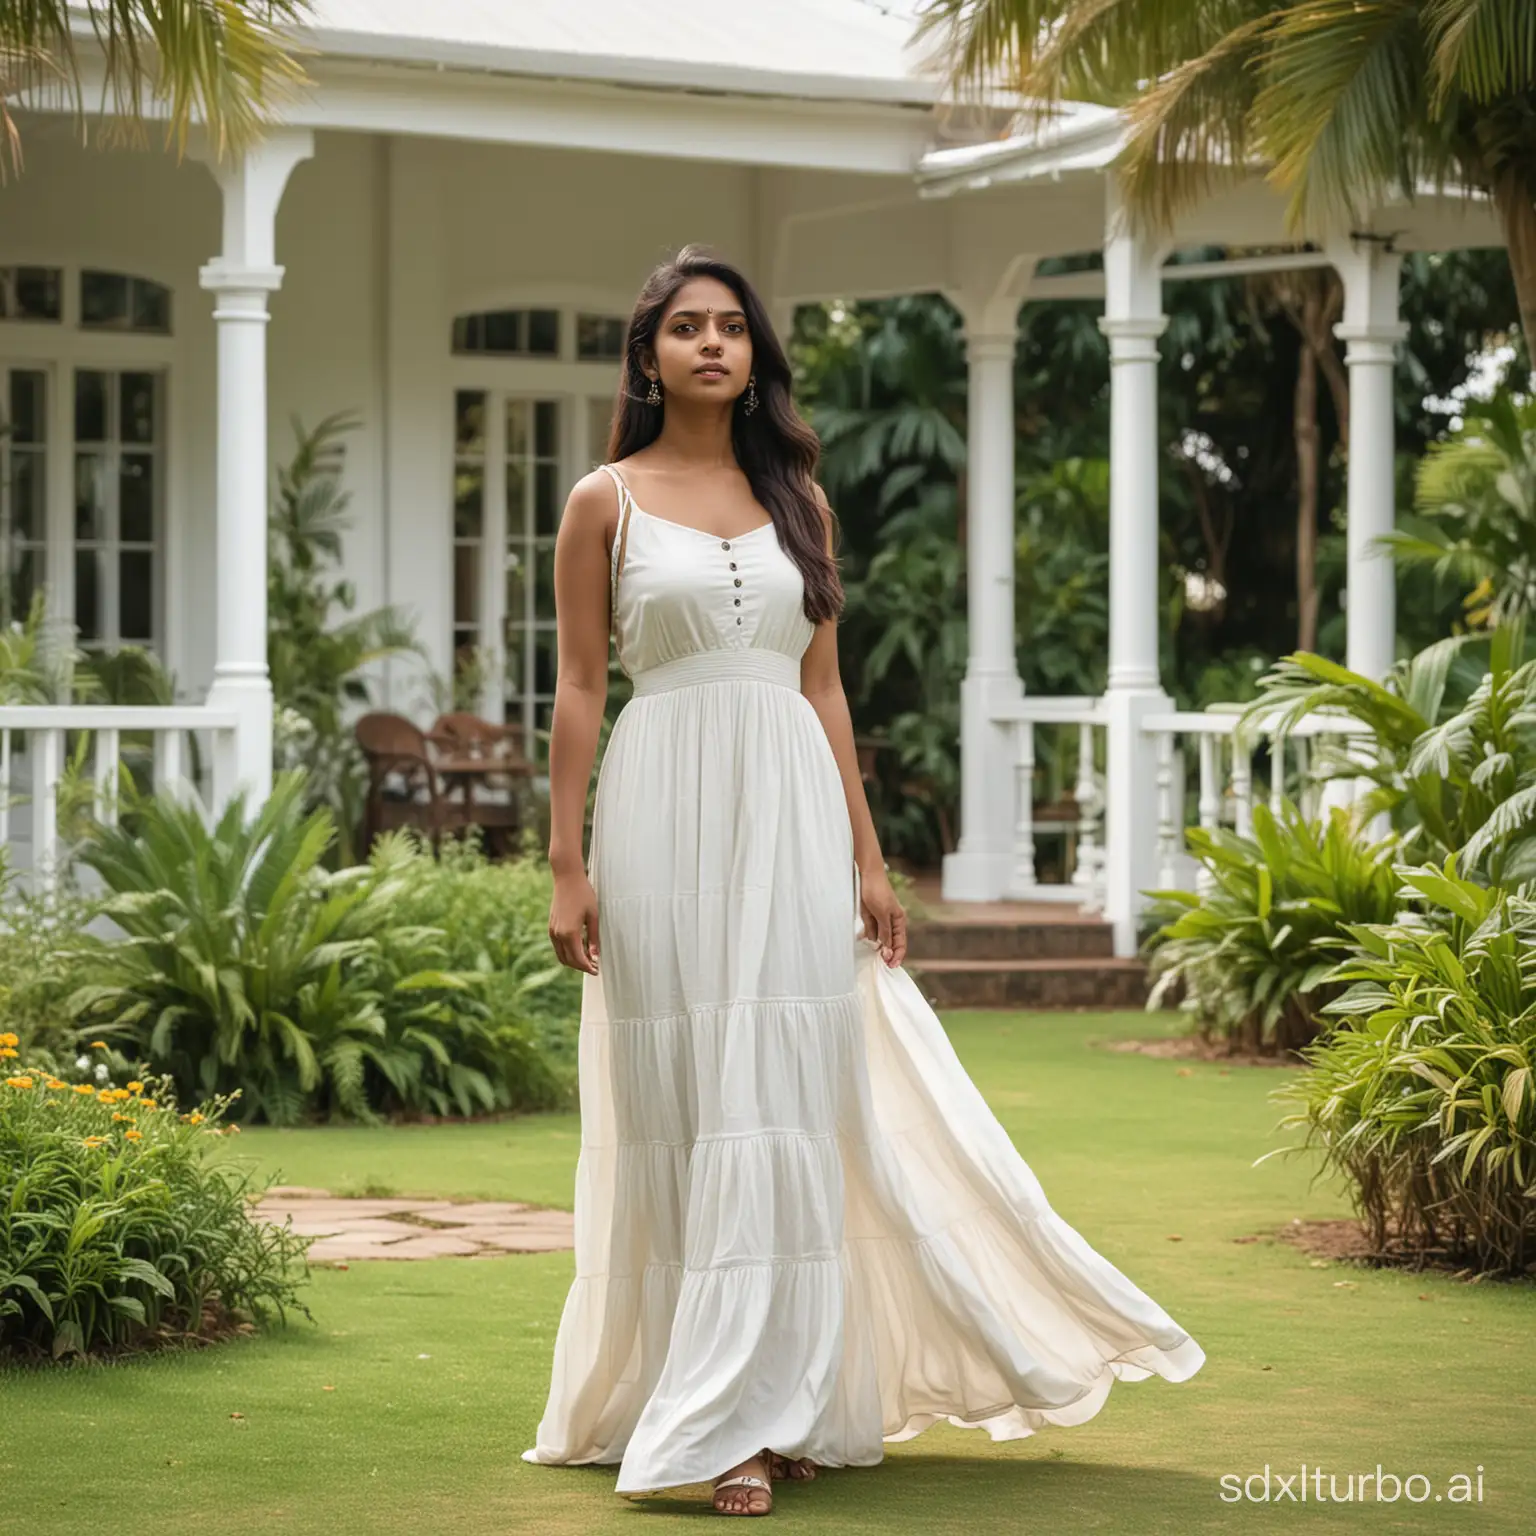 A young indian beautiful modern girl standing wearing white long dress , in front of a big bangalow with gardern